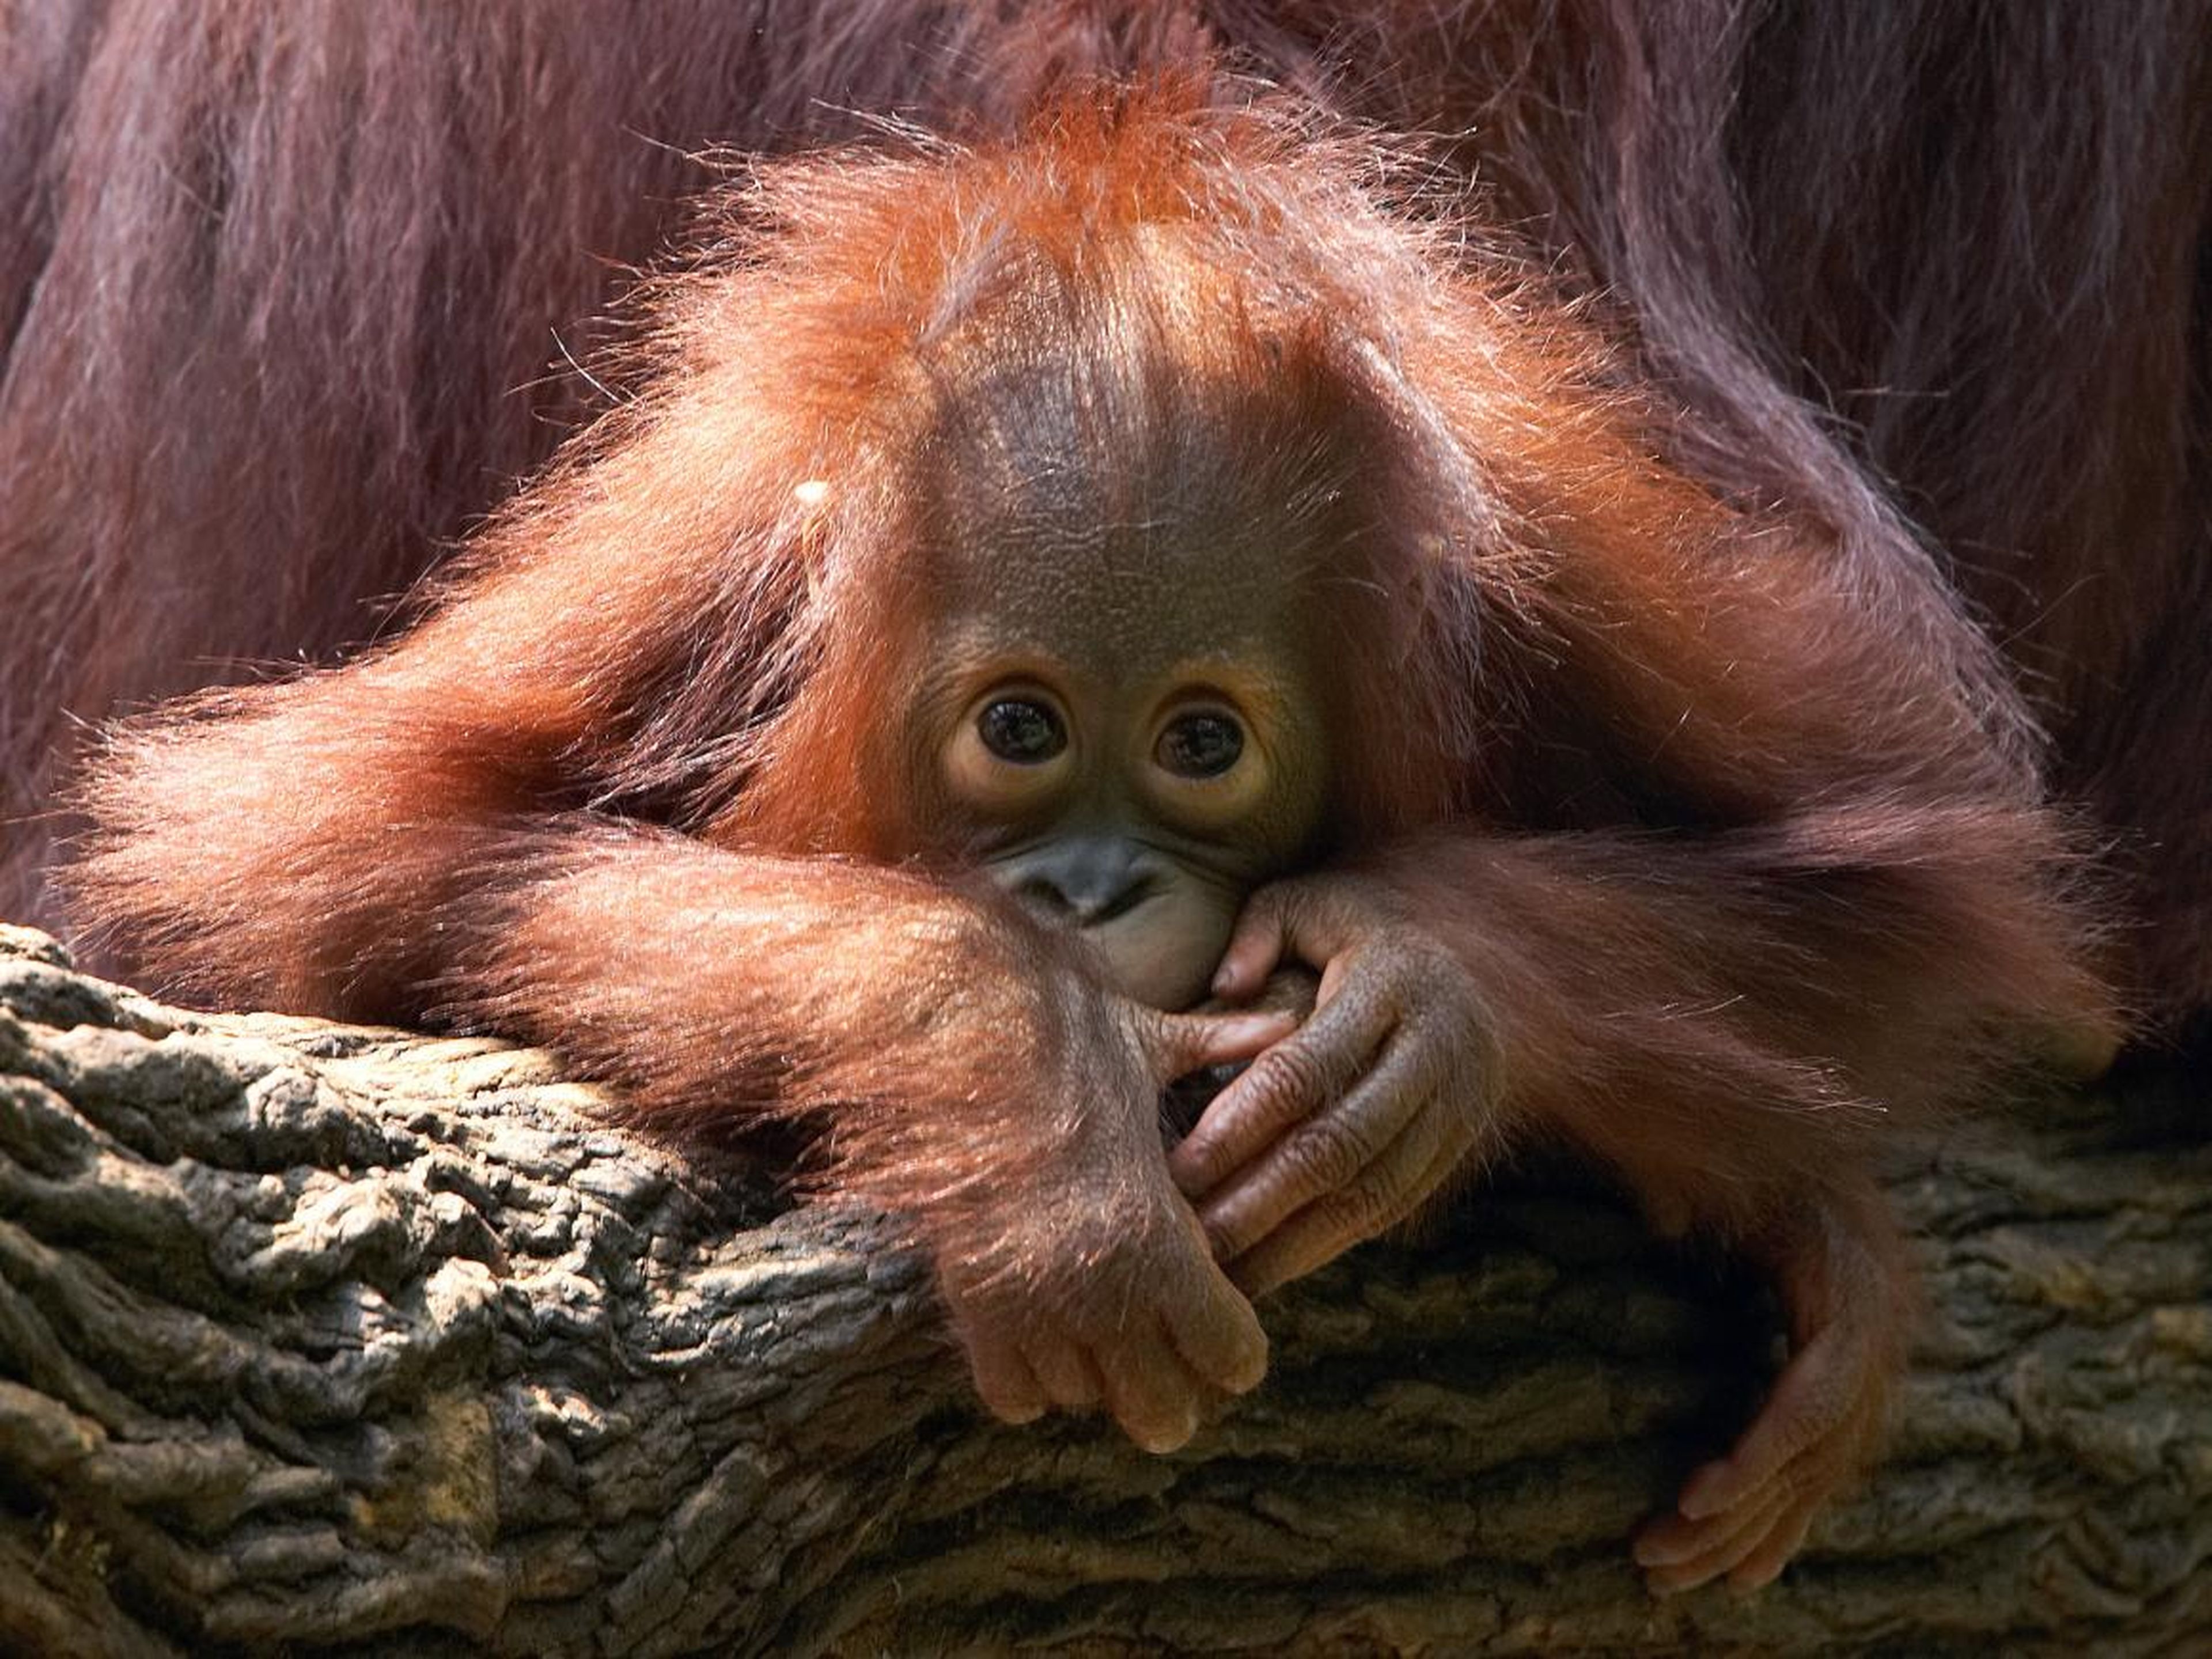 Bornean orangutans are one of the world's top 10 endangered species.